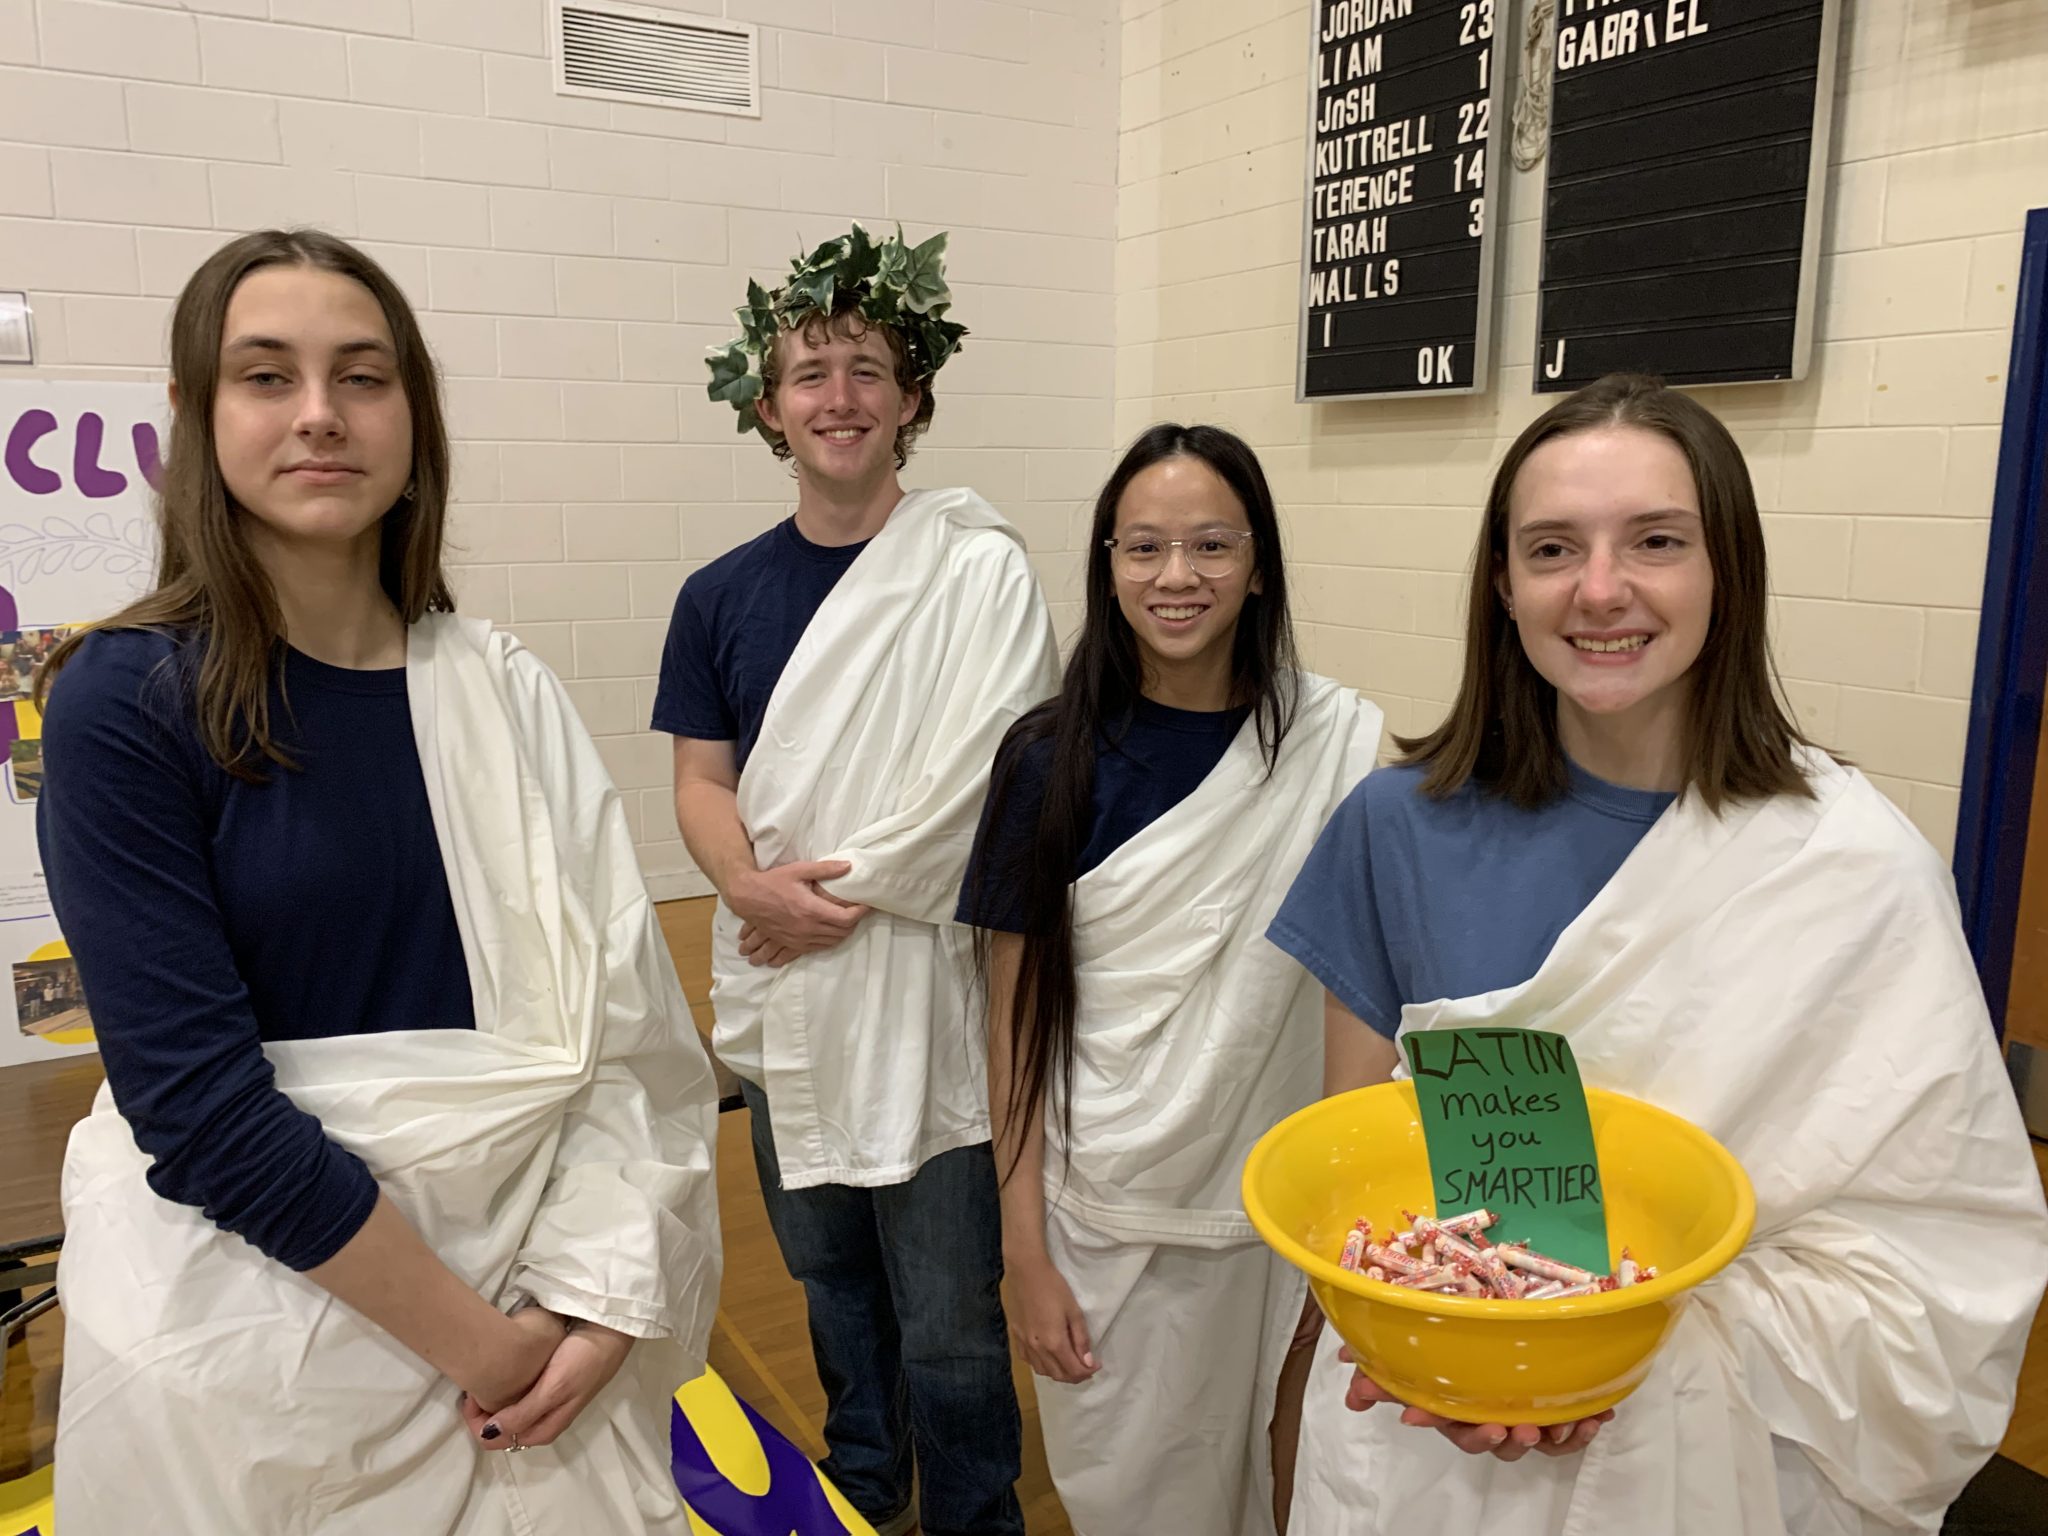 Four Latin Club members wearing togas pose for a photo